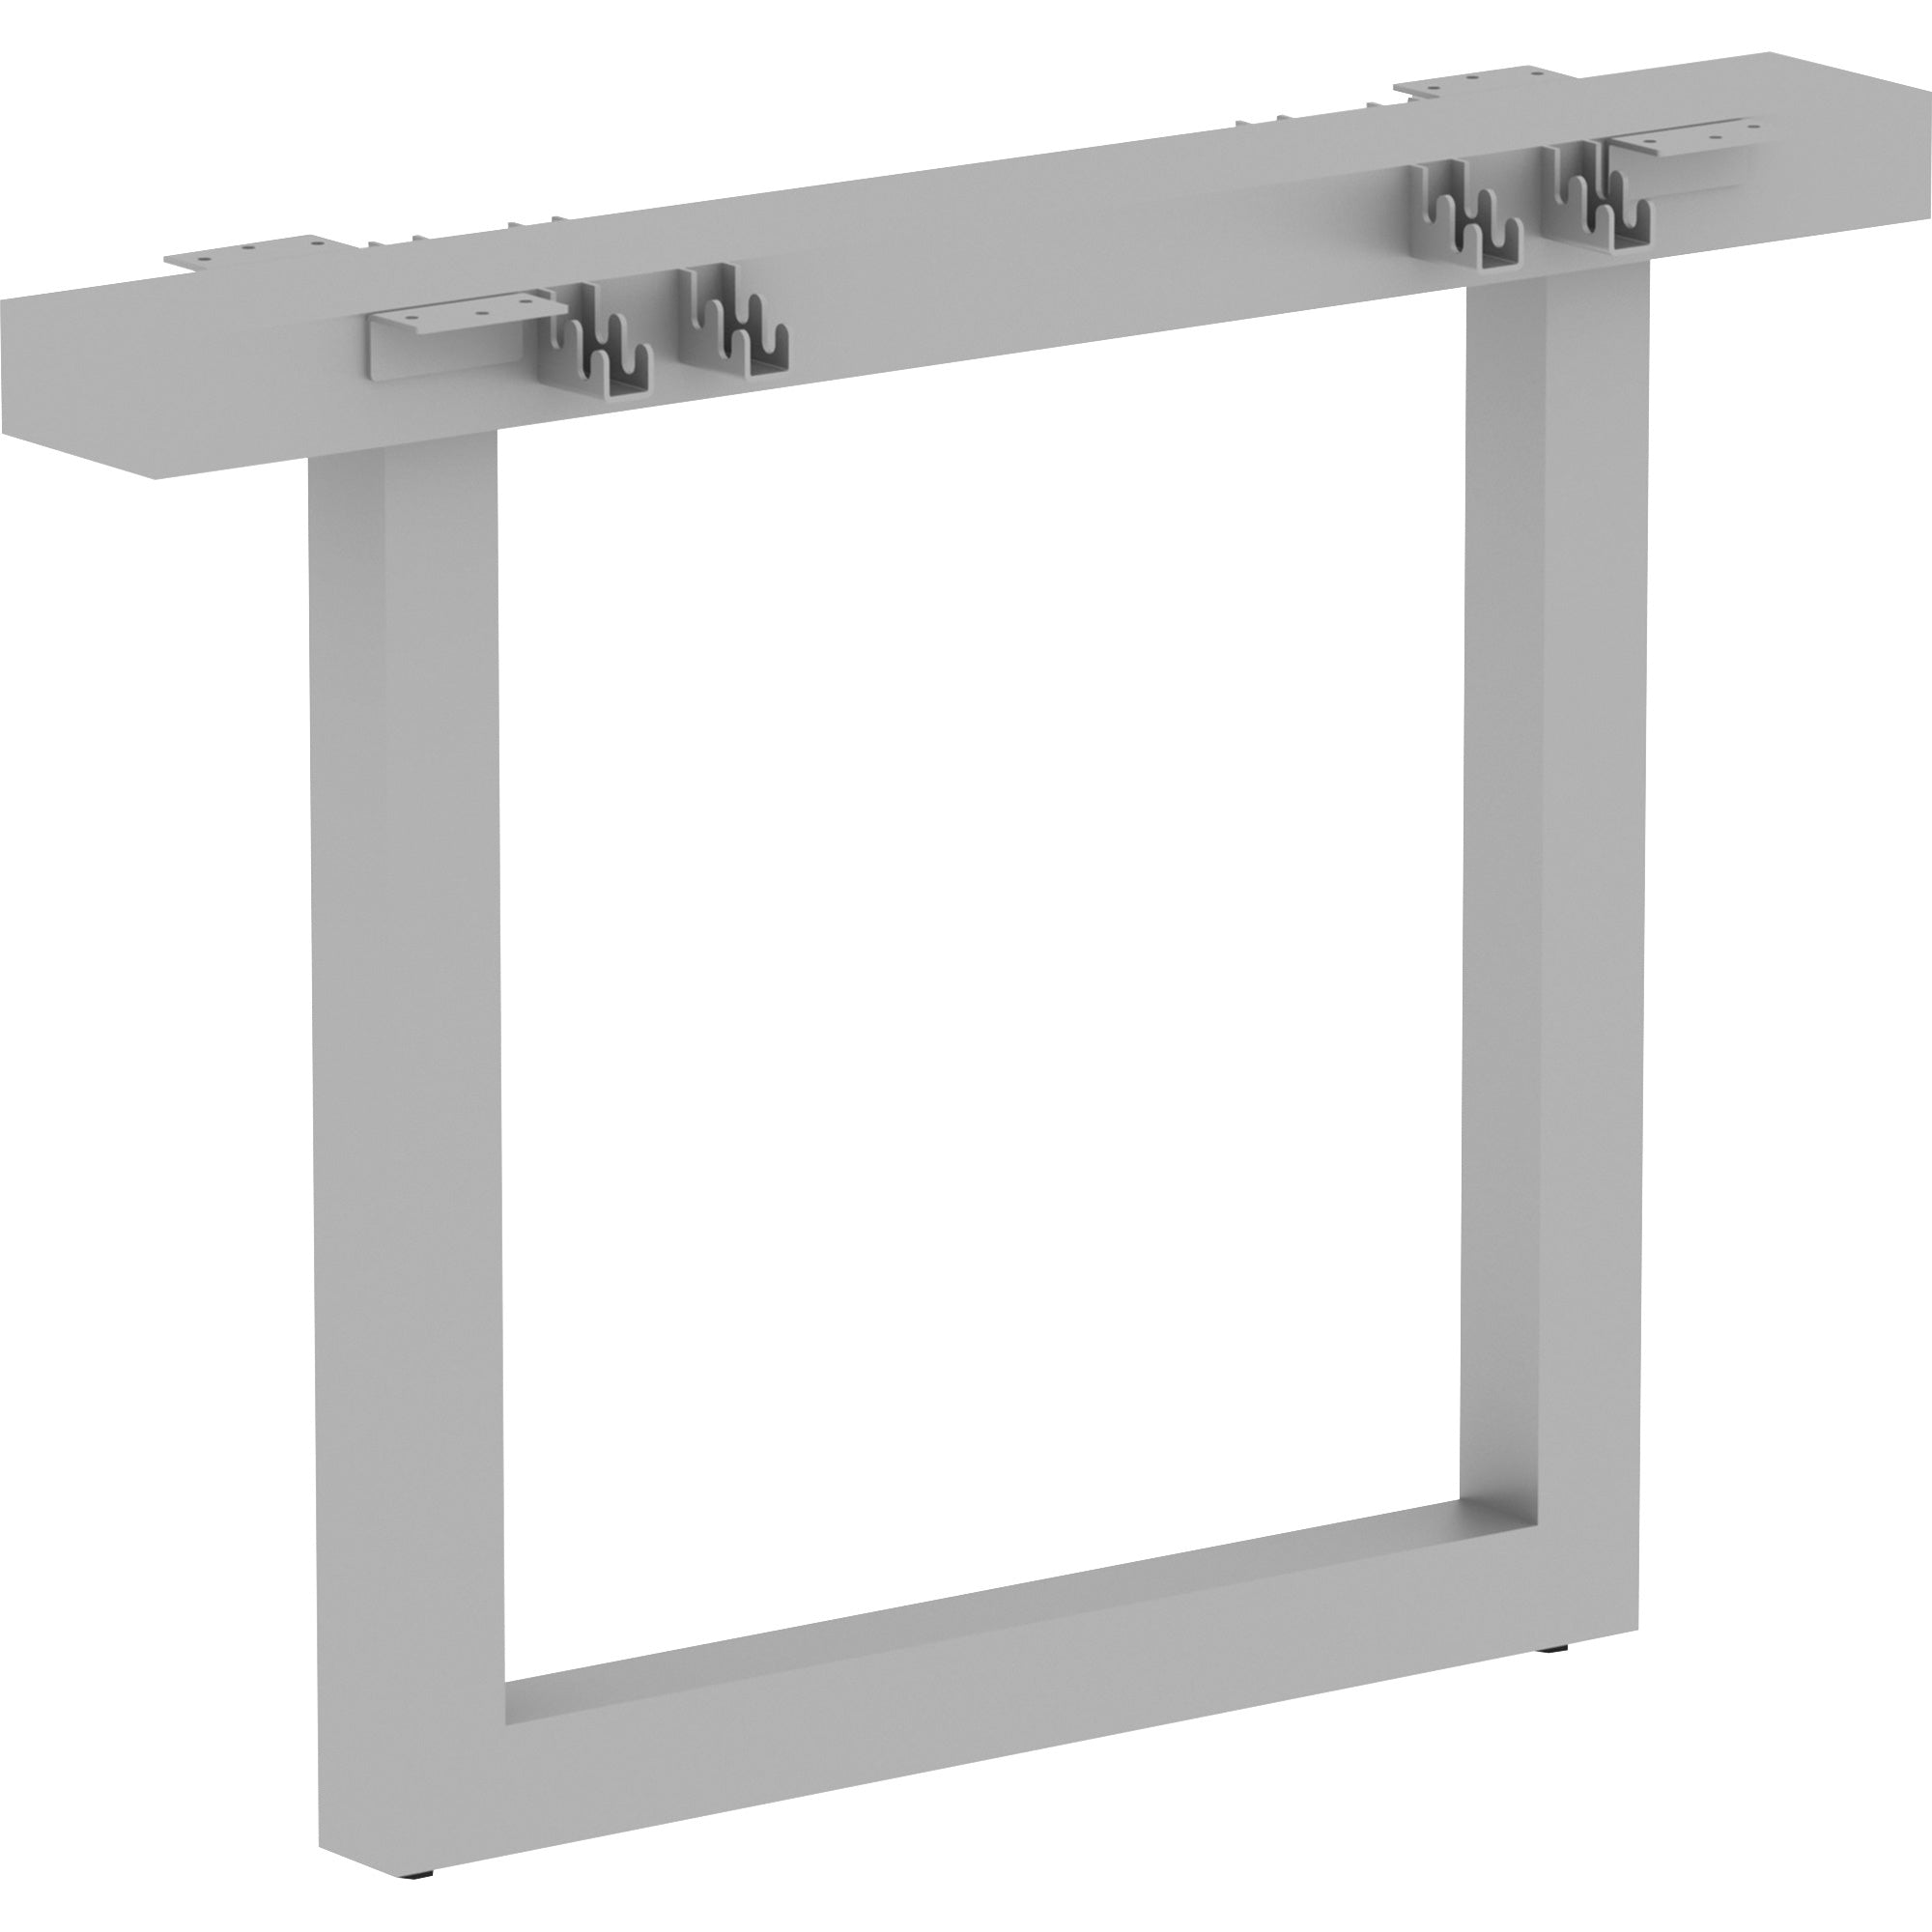 lorell-relevance-series-middle-unite-leg-386-x-63285-finish-silver-powder-coated_llr16252 - 1